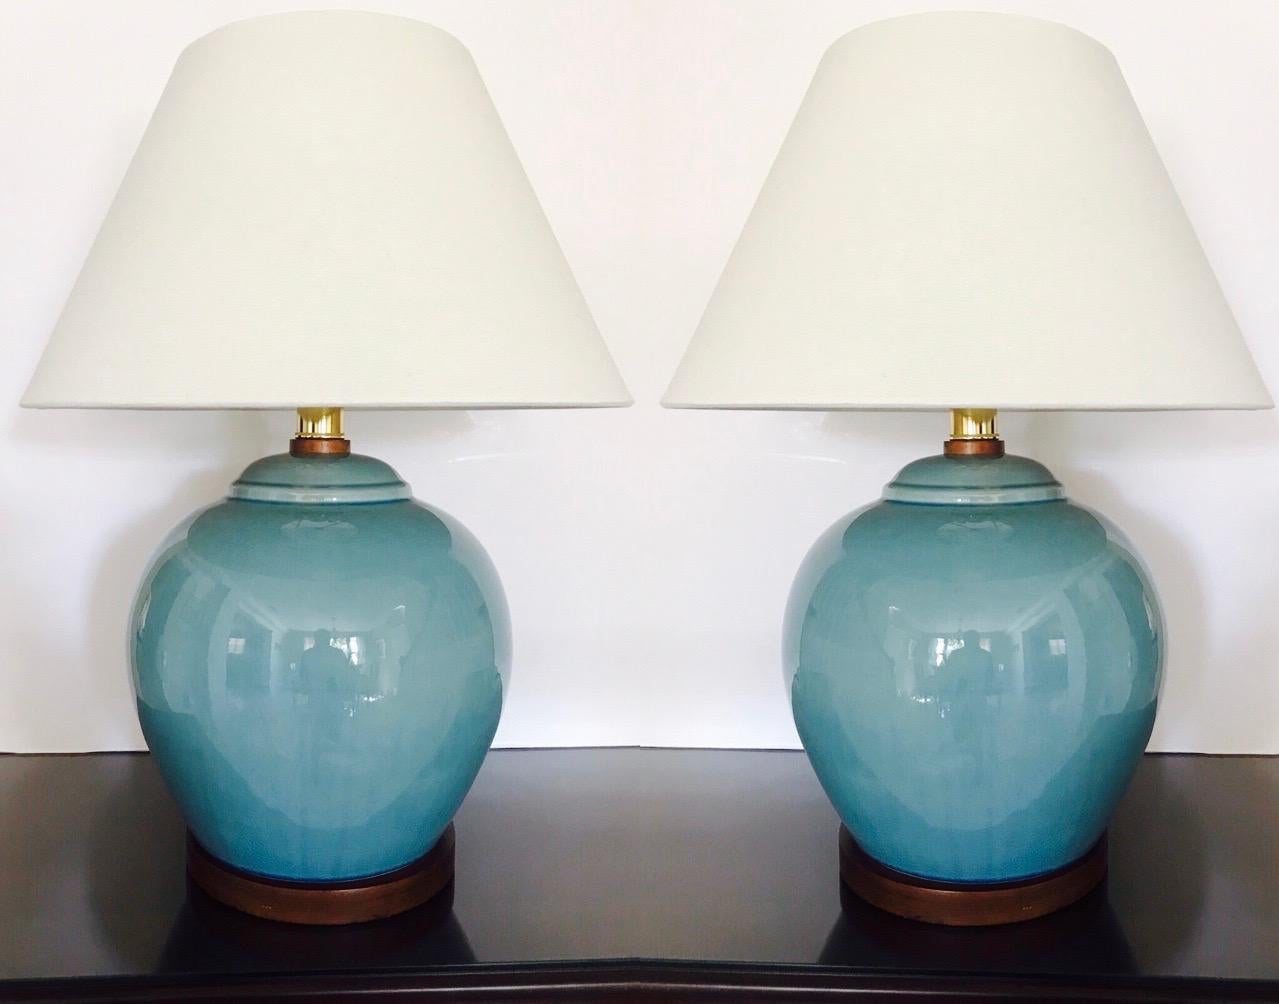 Gorgeous pair of large ceramic pottery lamps in Robin's Egg Blue. The lamps feature a crackle glaze finish with hand-painted trim in cerulean blue and with walnut wood bases and fittings. Fitted with brass sockets and three-way switch and shown with